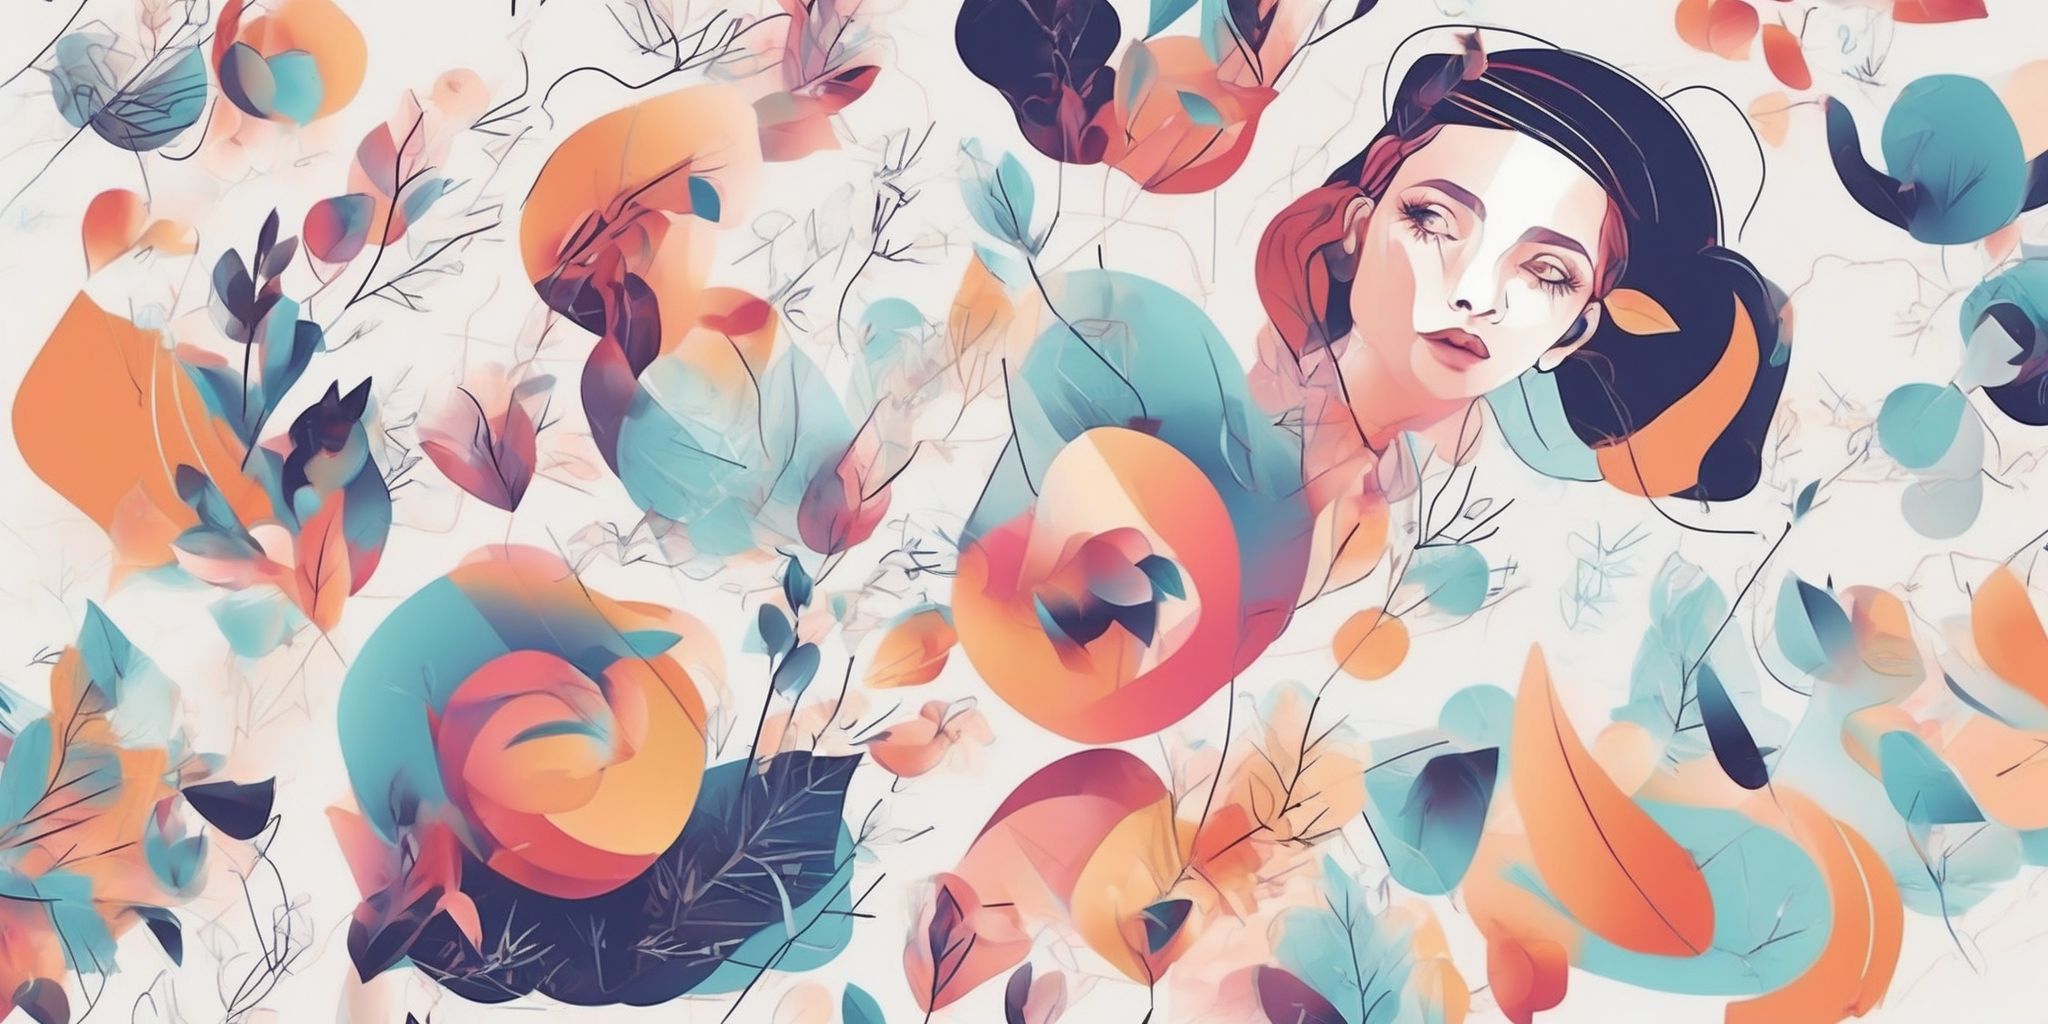 Trends in illustration style with gradients and white background